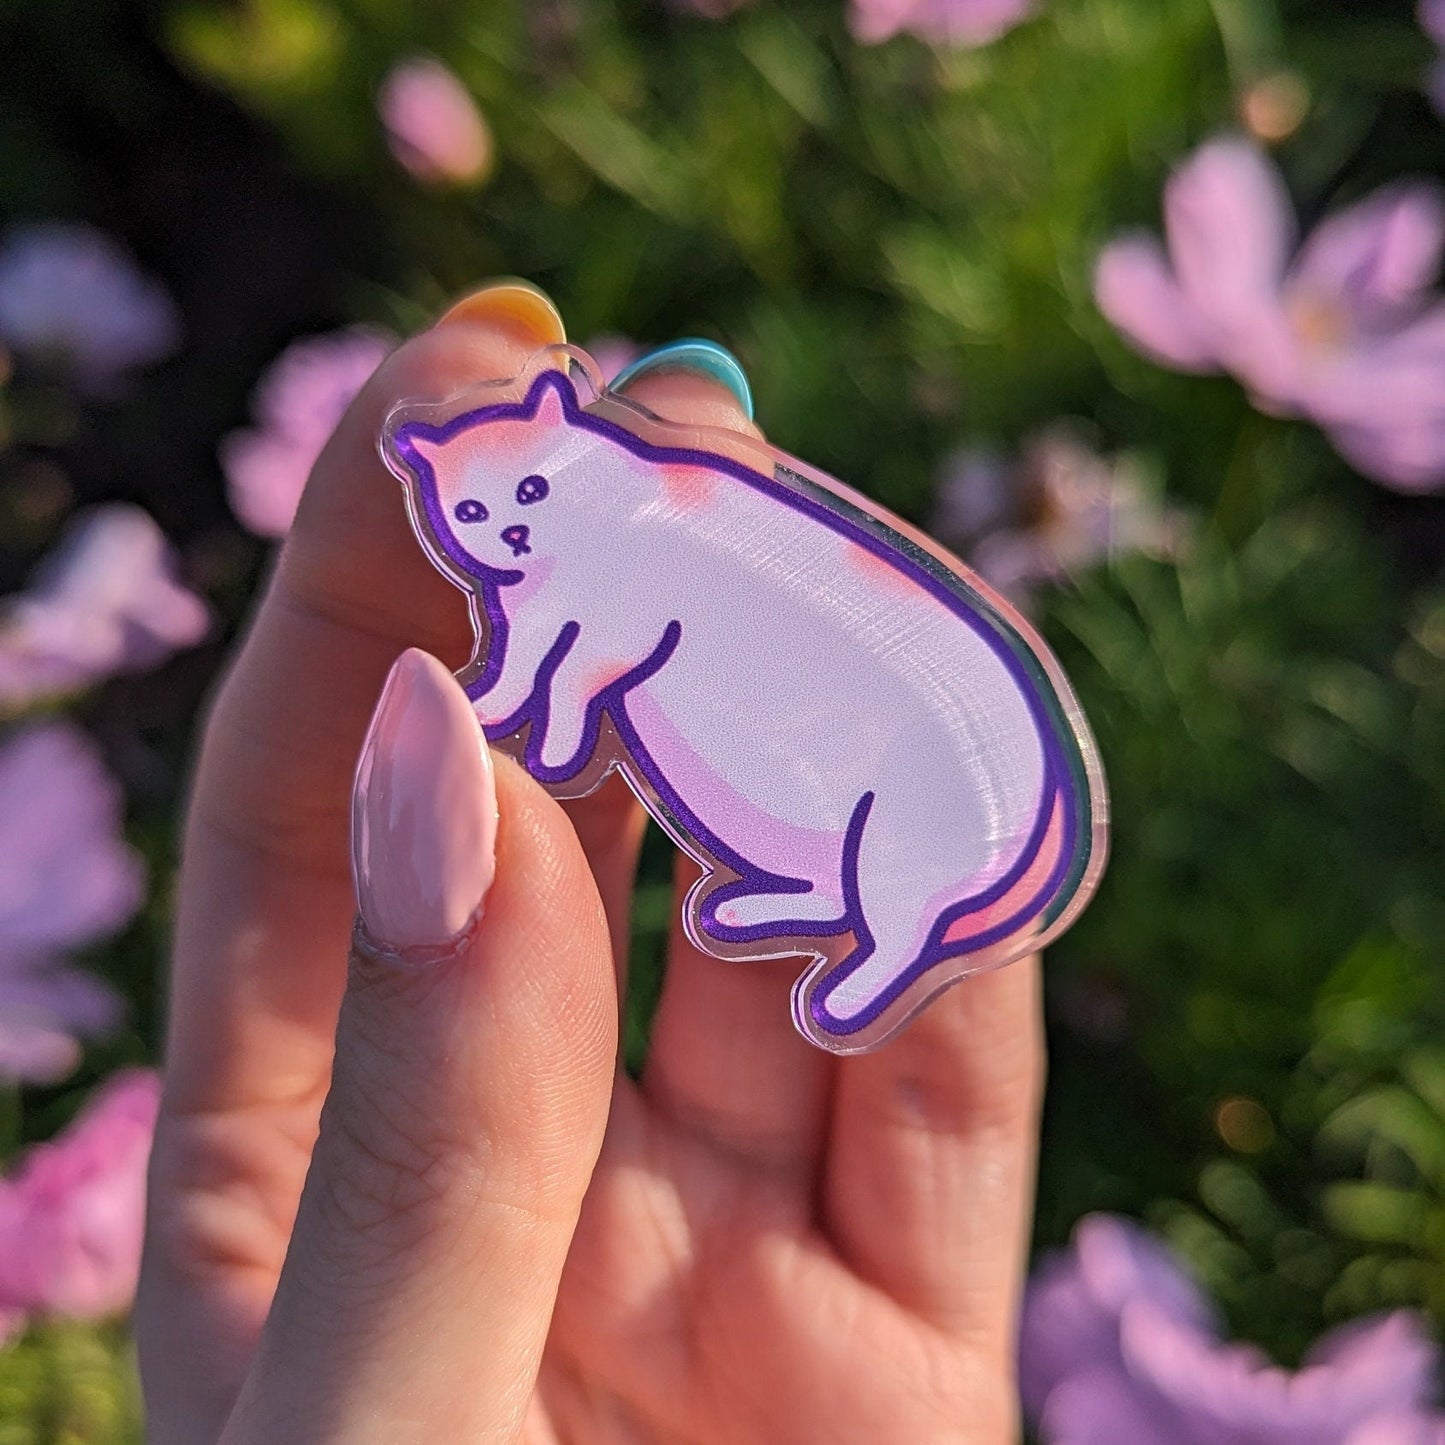 Funny Cat Meme Acrylic Pin | He's Not Fat, Just Big Boned | 40mm Acrylic Badge, Butterfly Clutch | Funny, Sustainable & Eco-Friendly Gift